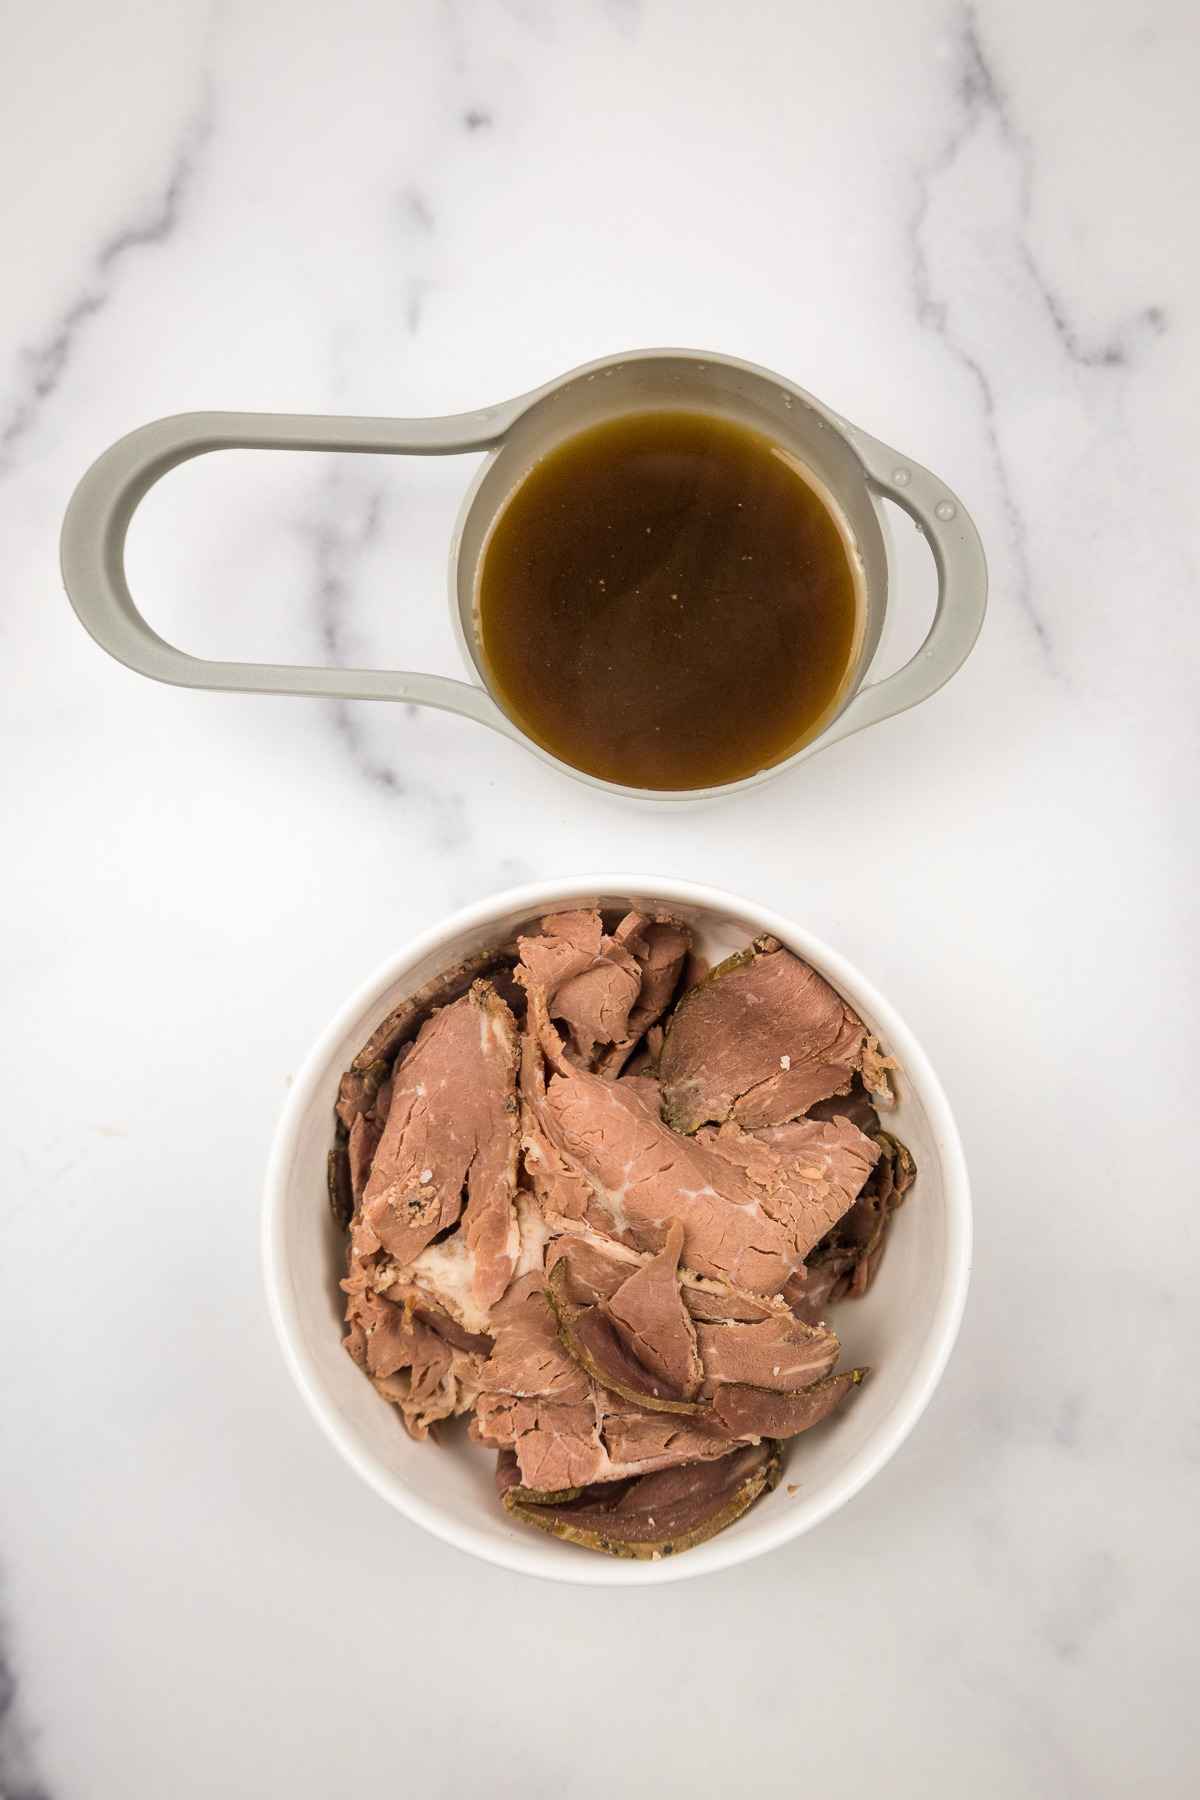 Deli beef and beef broth.